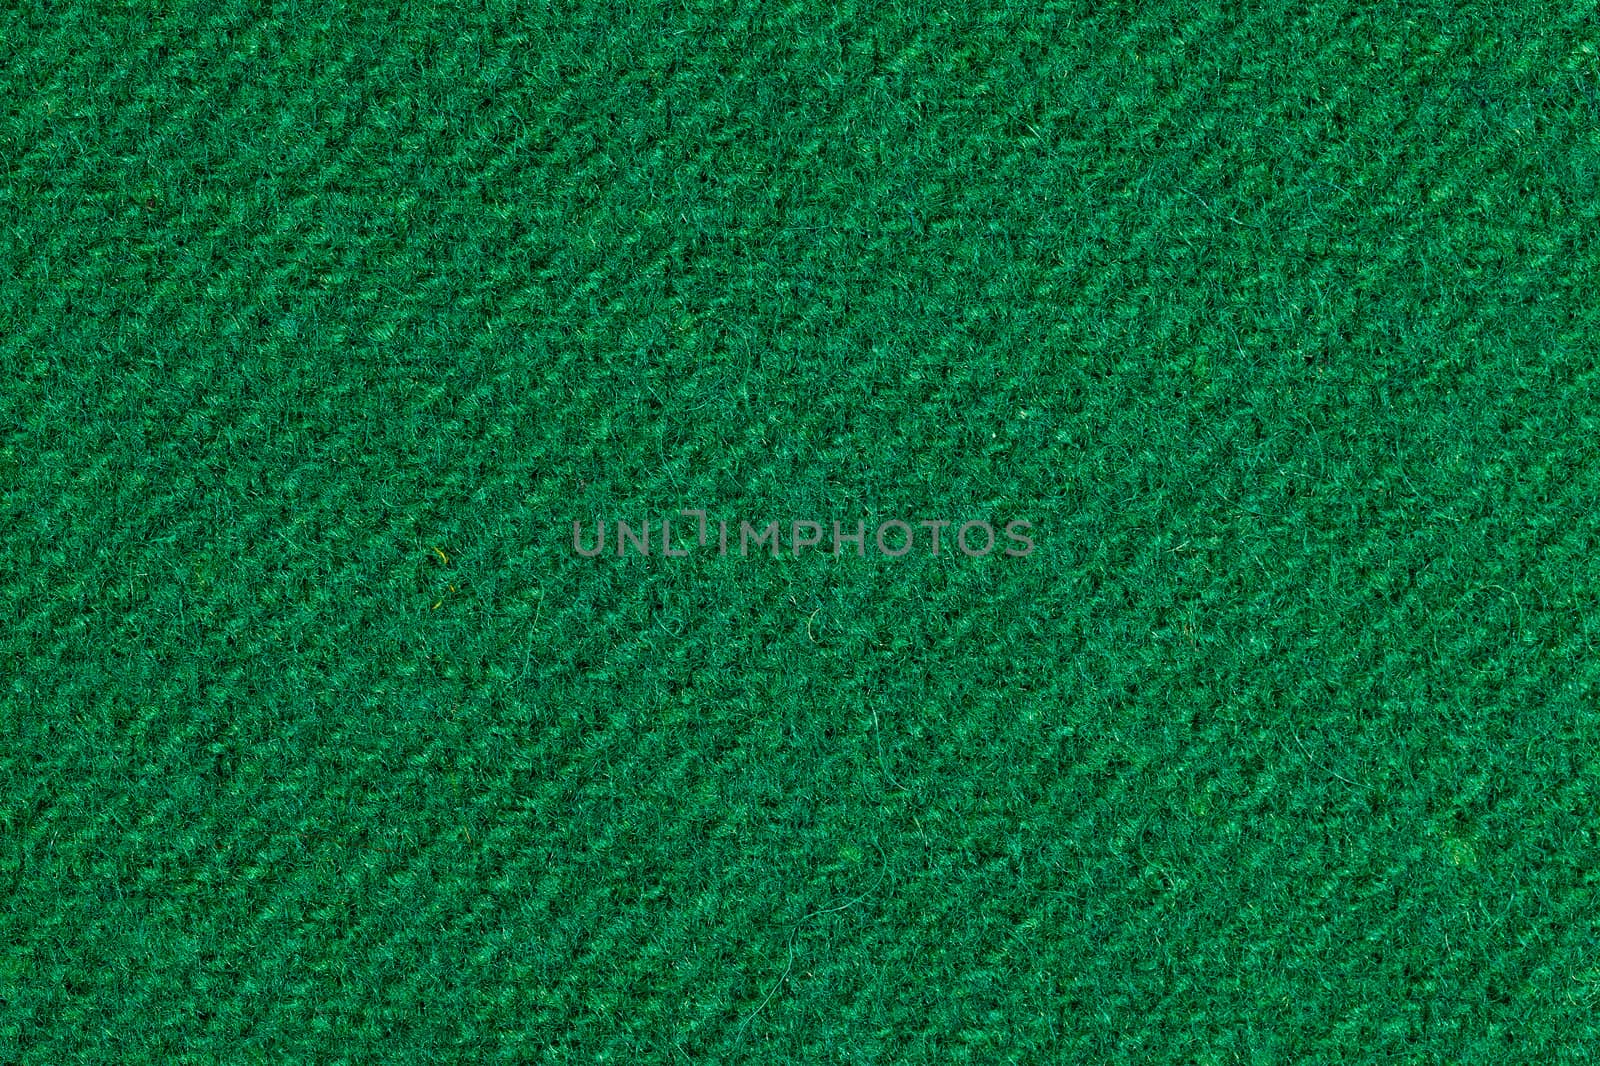 Poker table felt in green color by Discovod